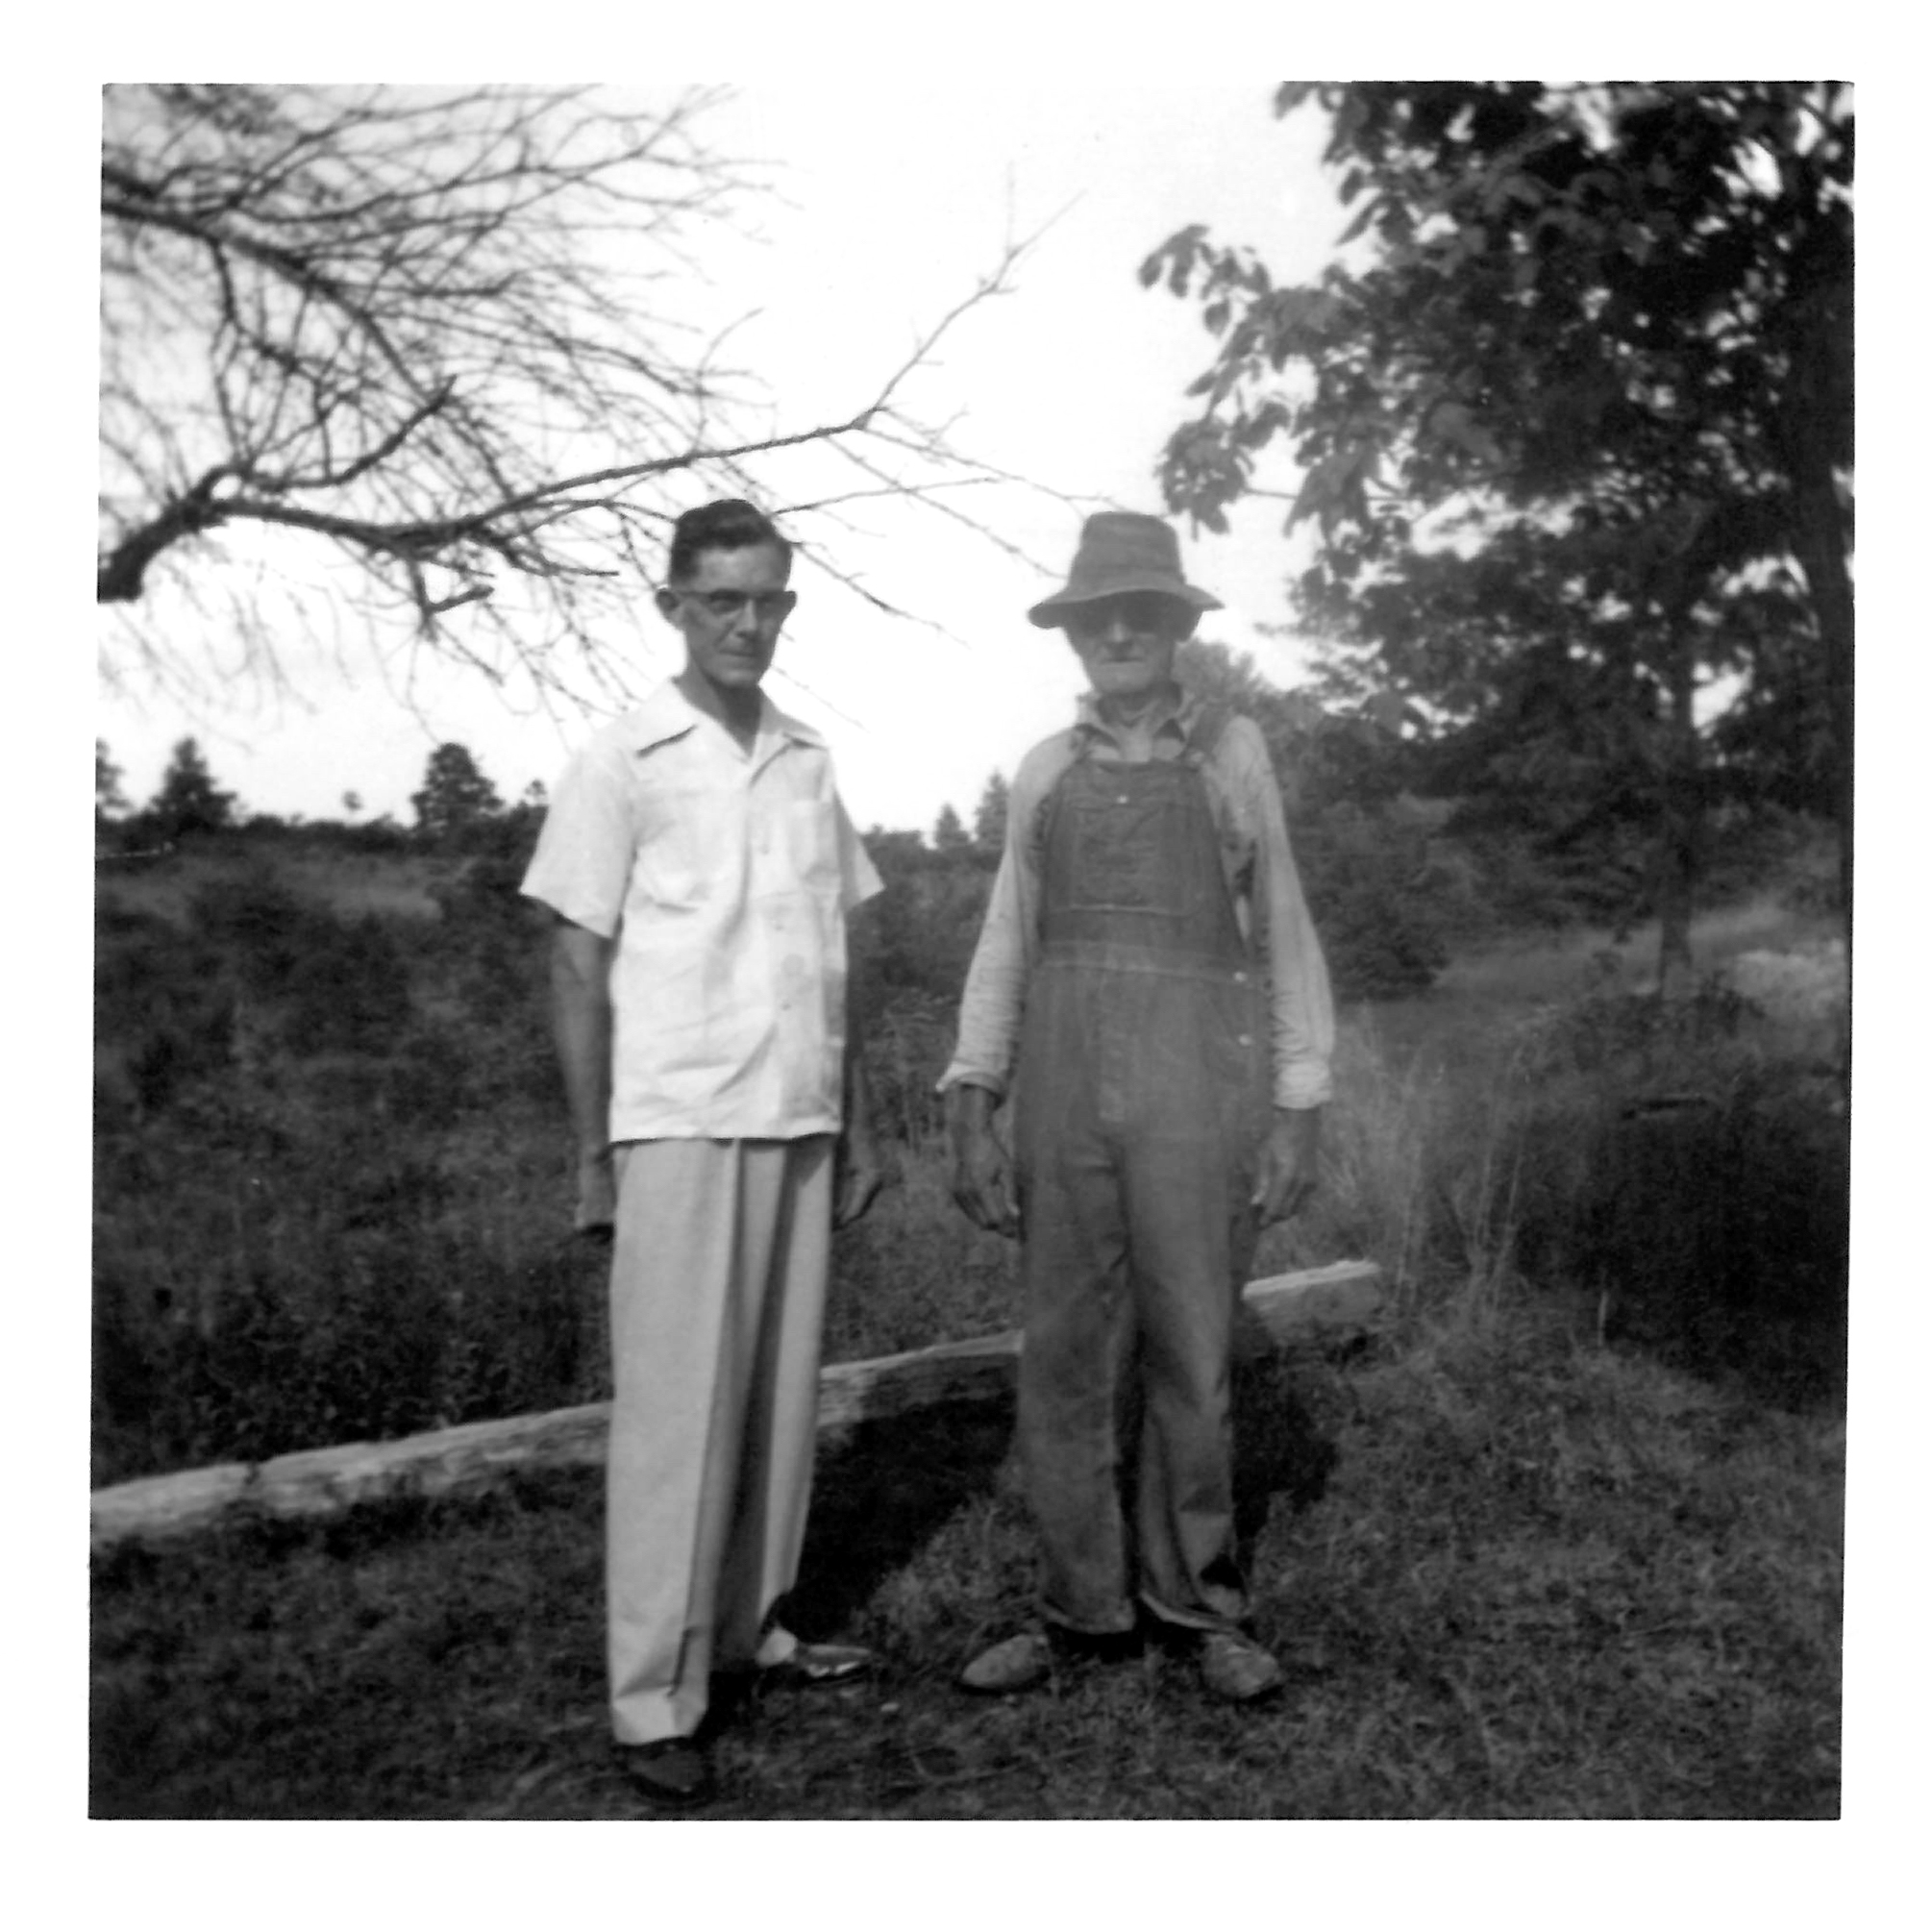 Black and white photo of Colonel's dad and grandfather standing in a field next to trees